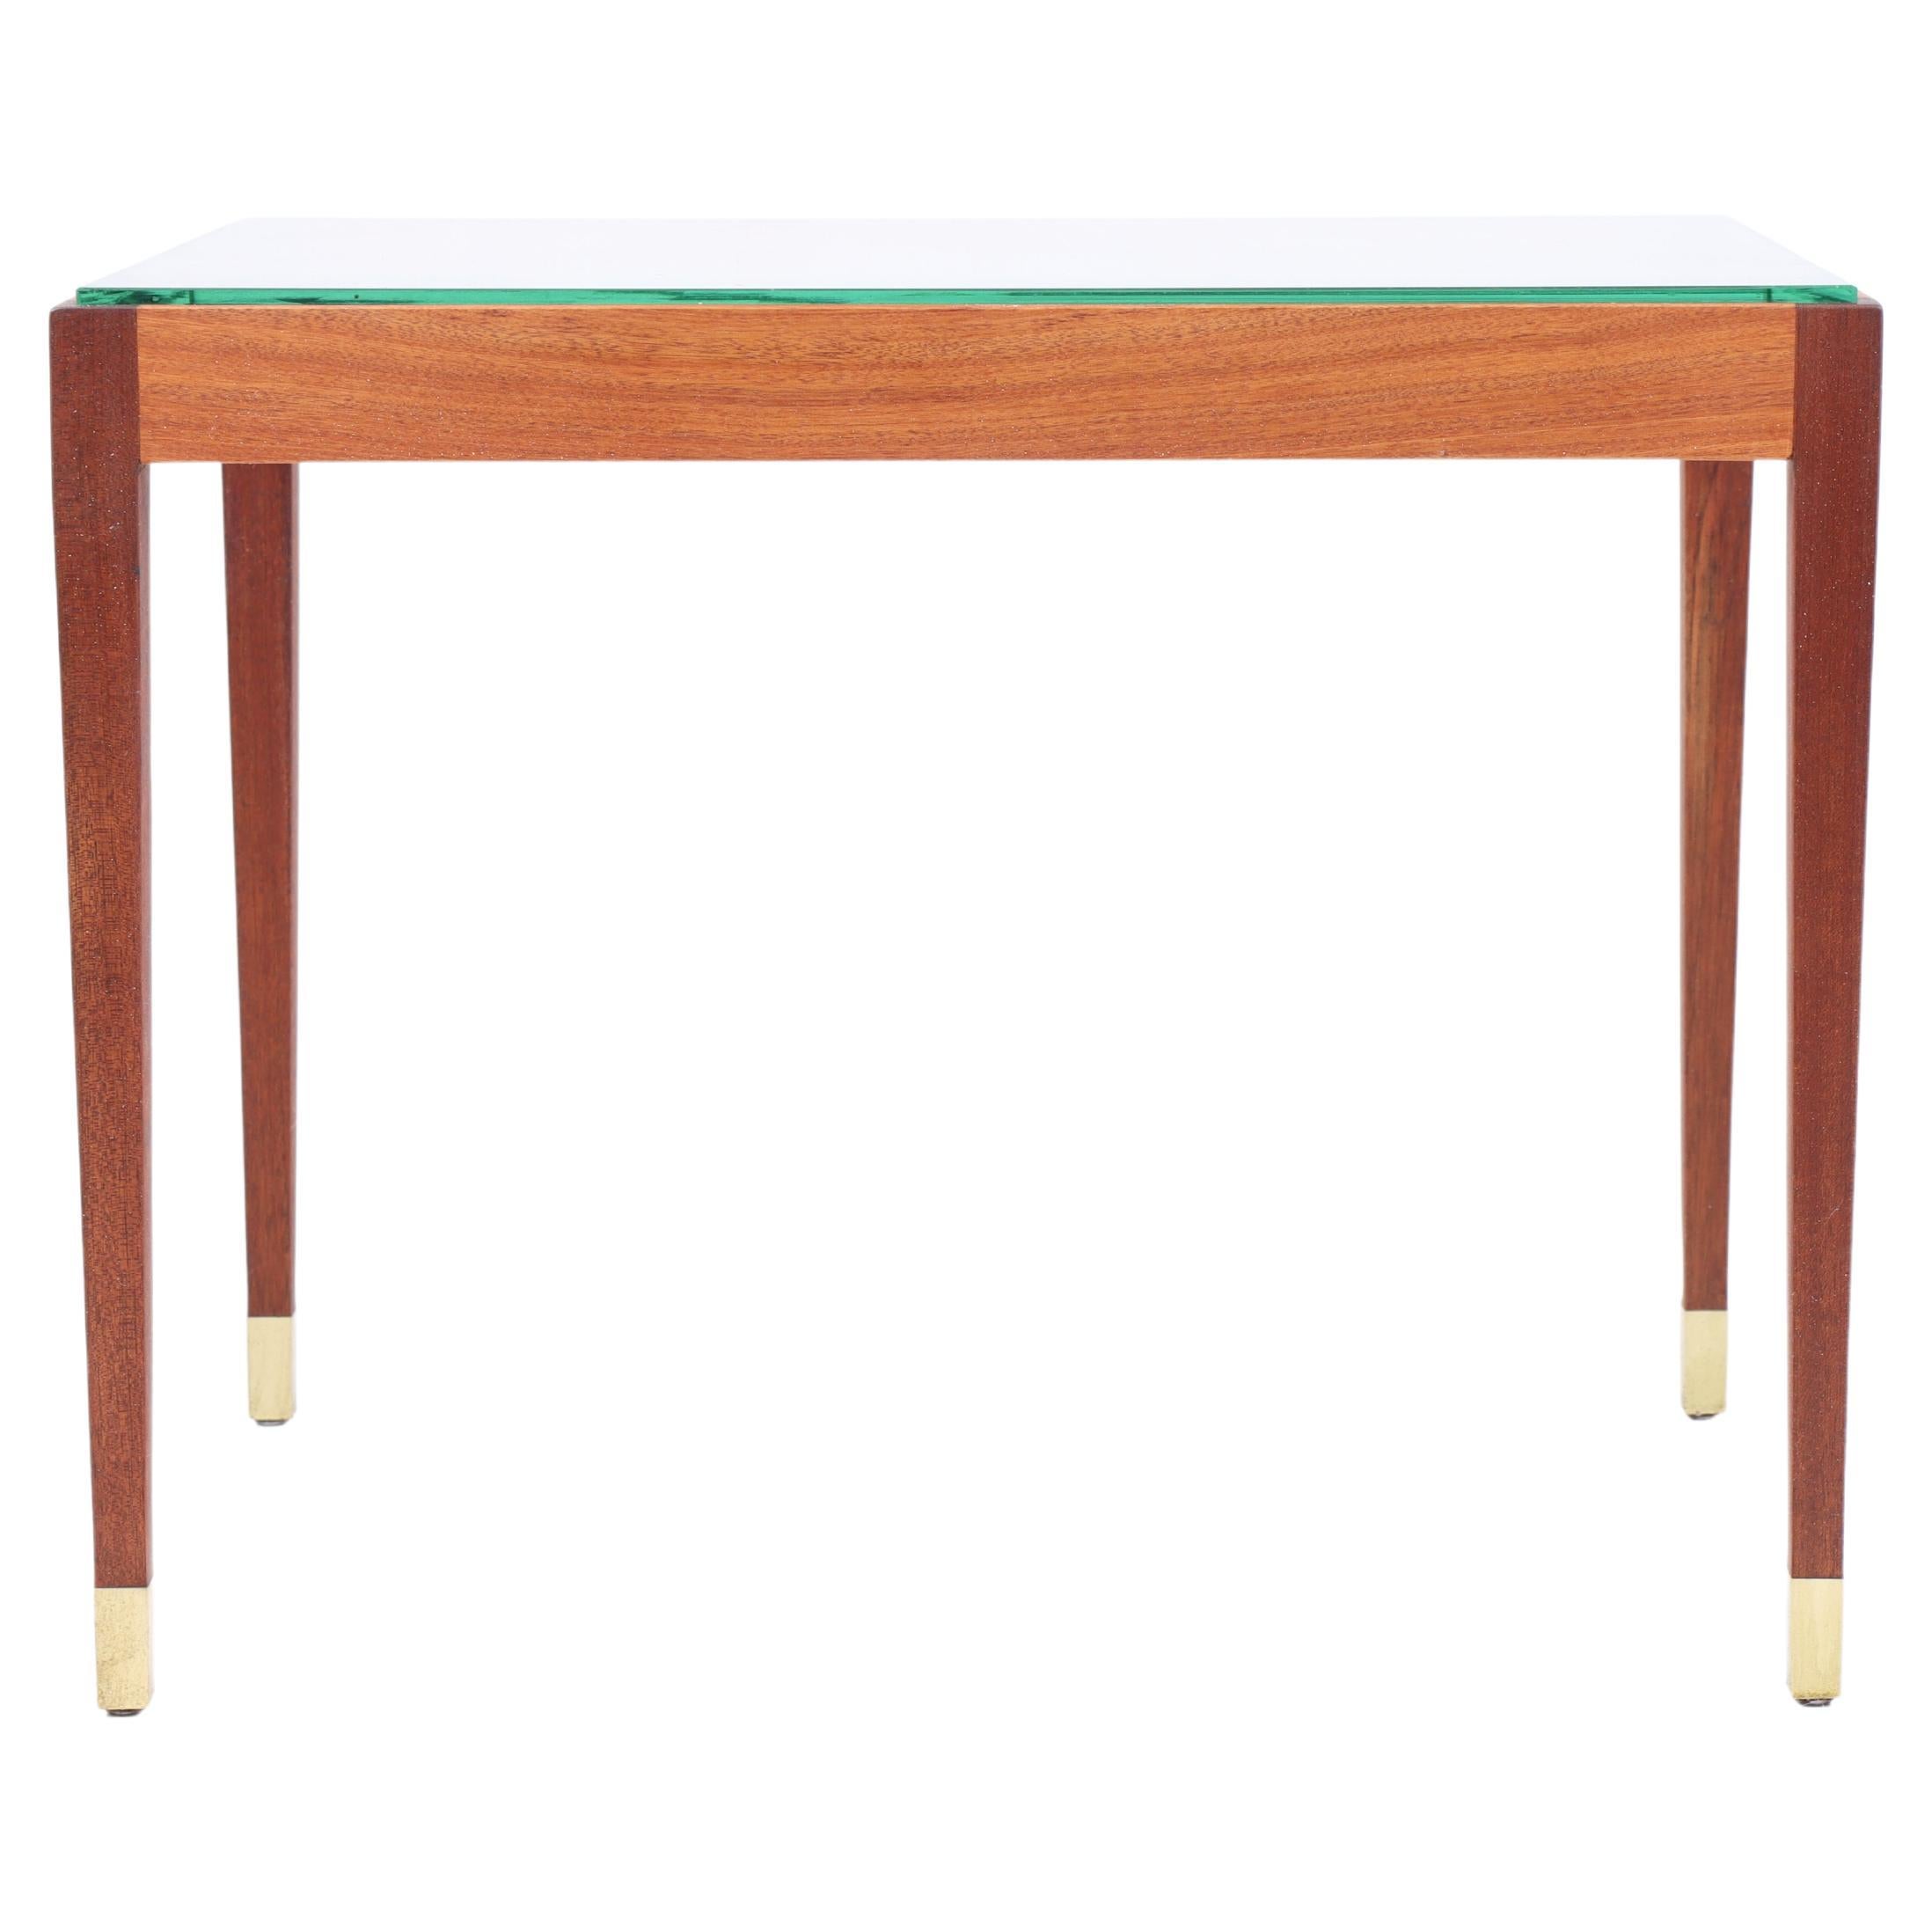 Midcentury Low Table in Glass and Teak, Made in Denmark 1960s